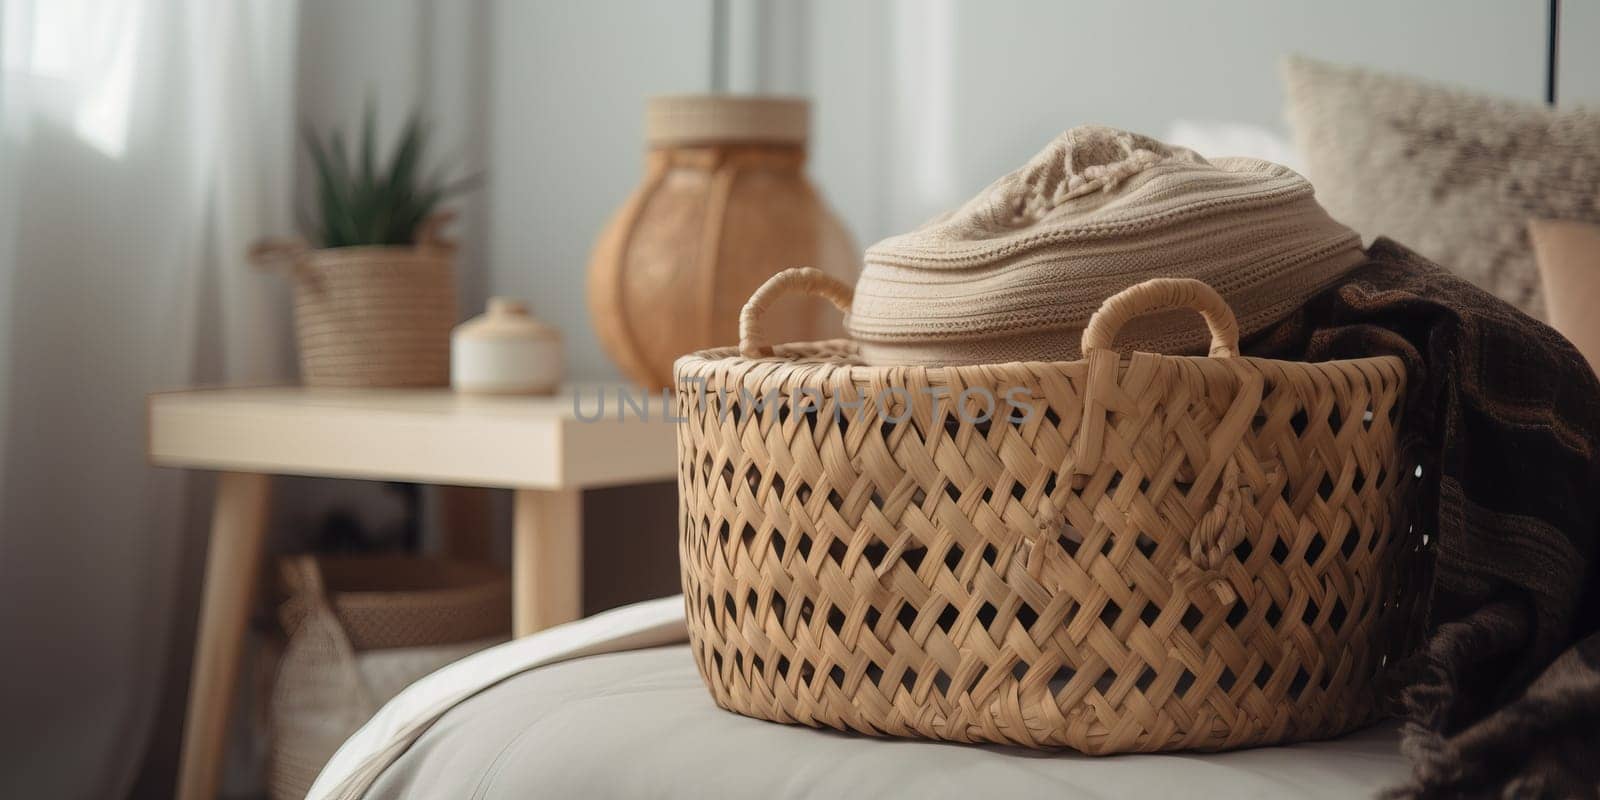 A chic woven basket for clothes storage is in a comfy room. by tan4ikk1